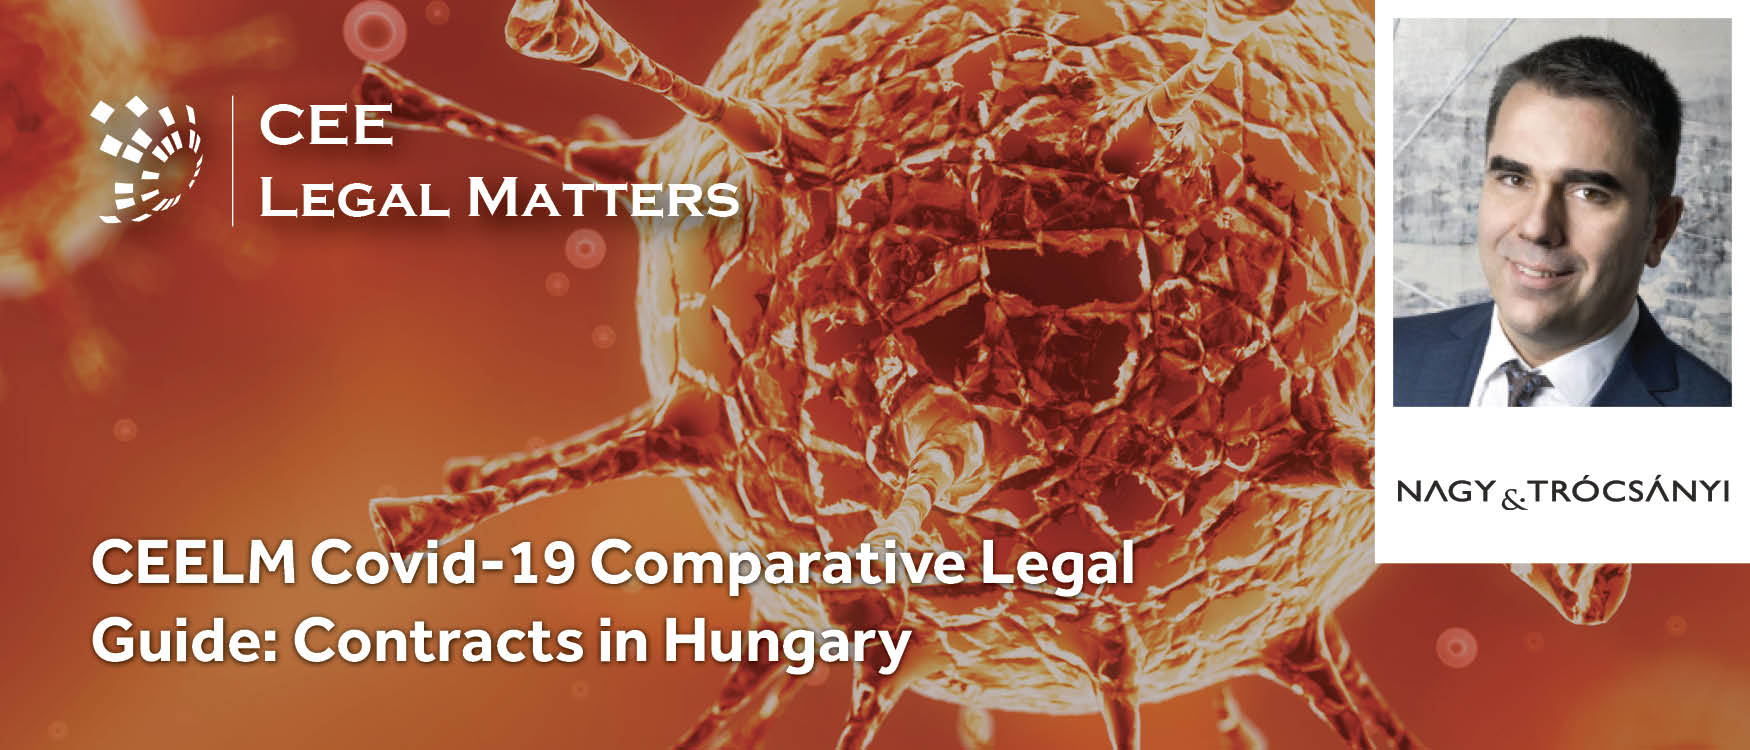 CEELM Covid-19 Comparative Legal Guide: Contracts in Hungary